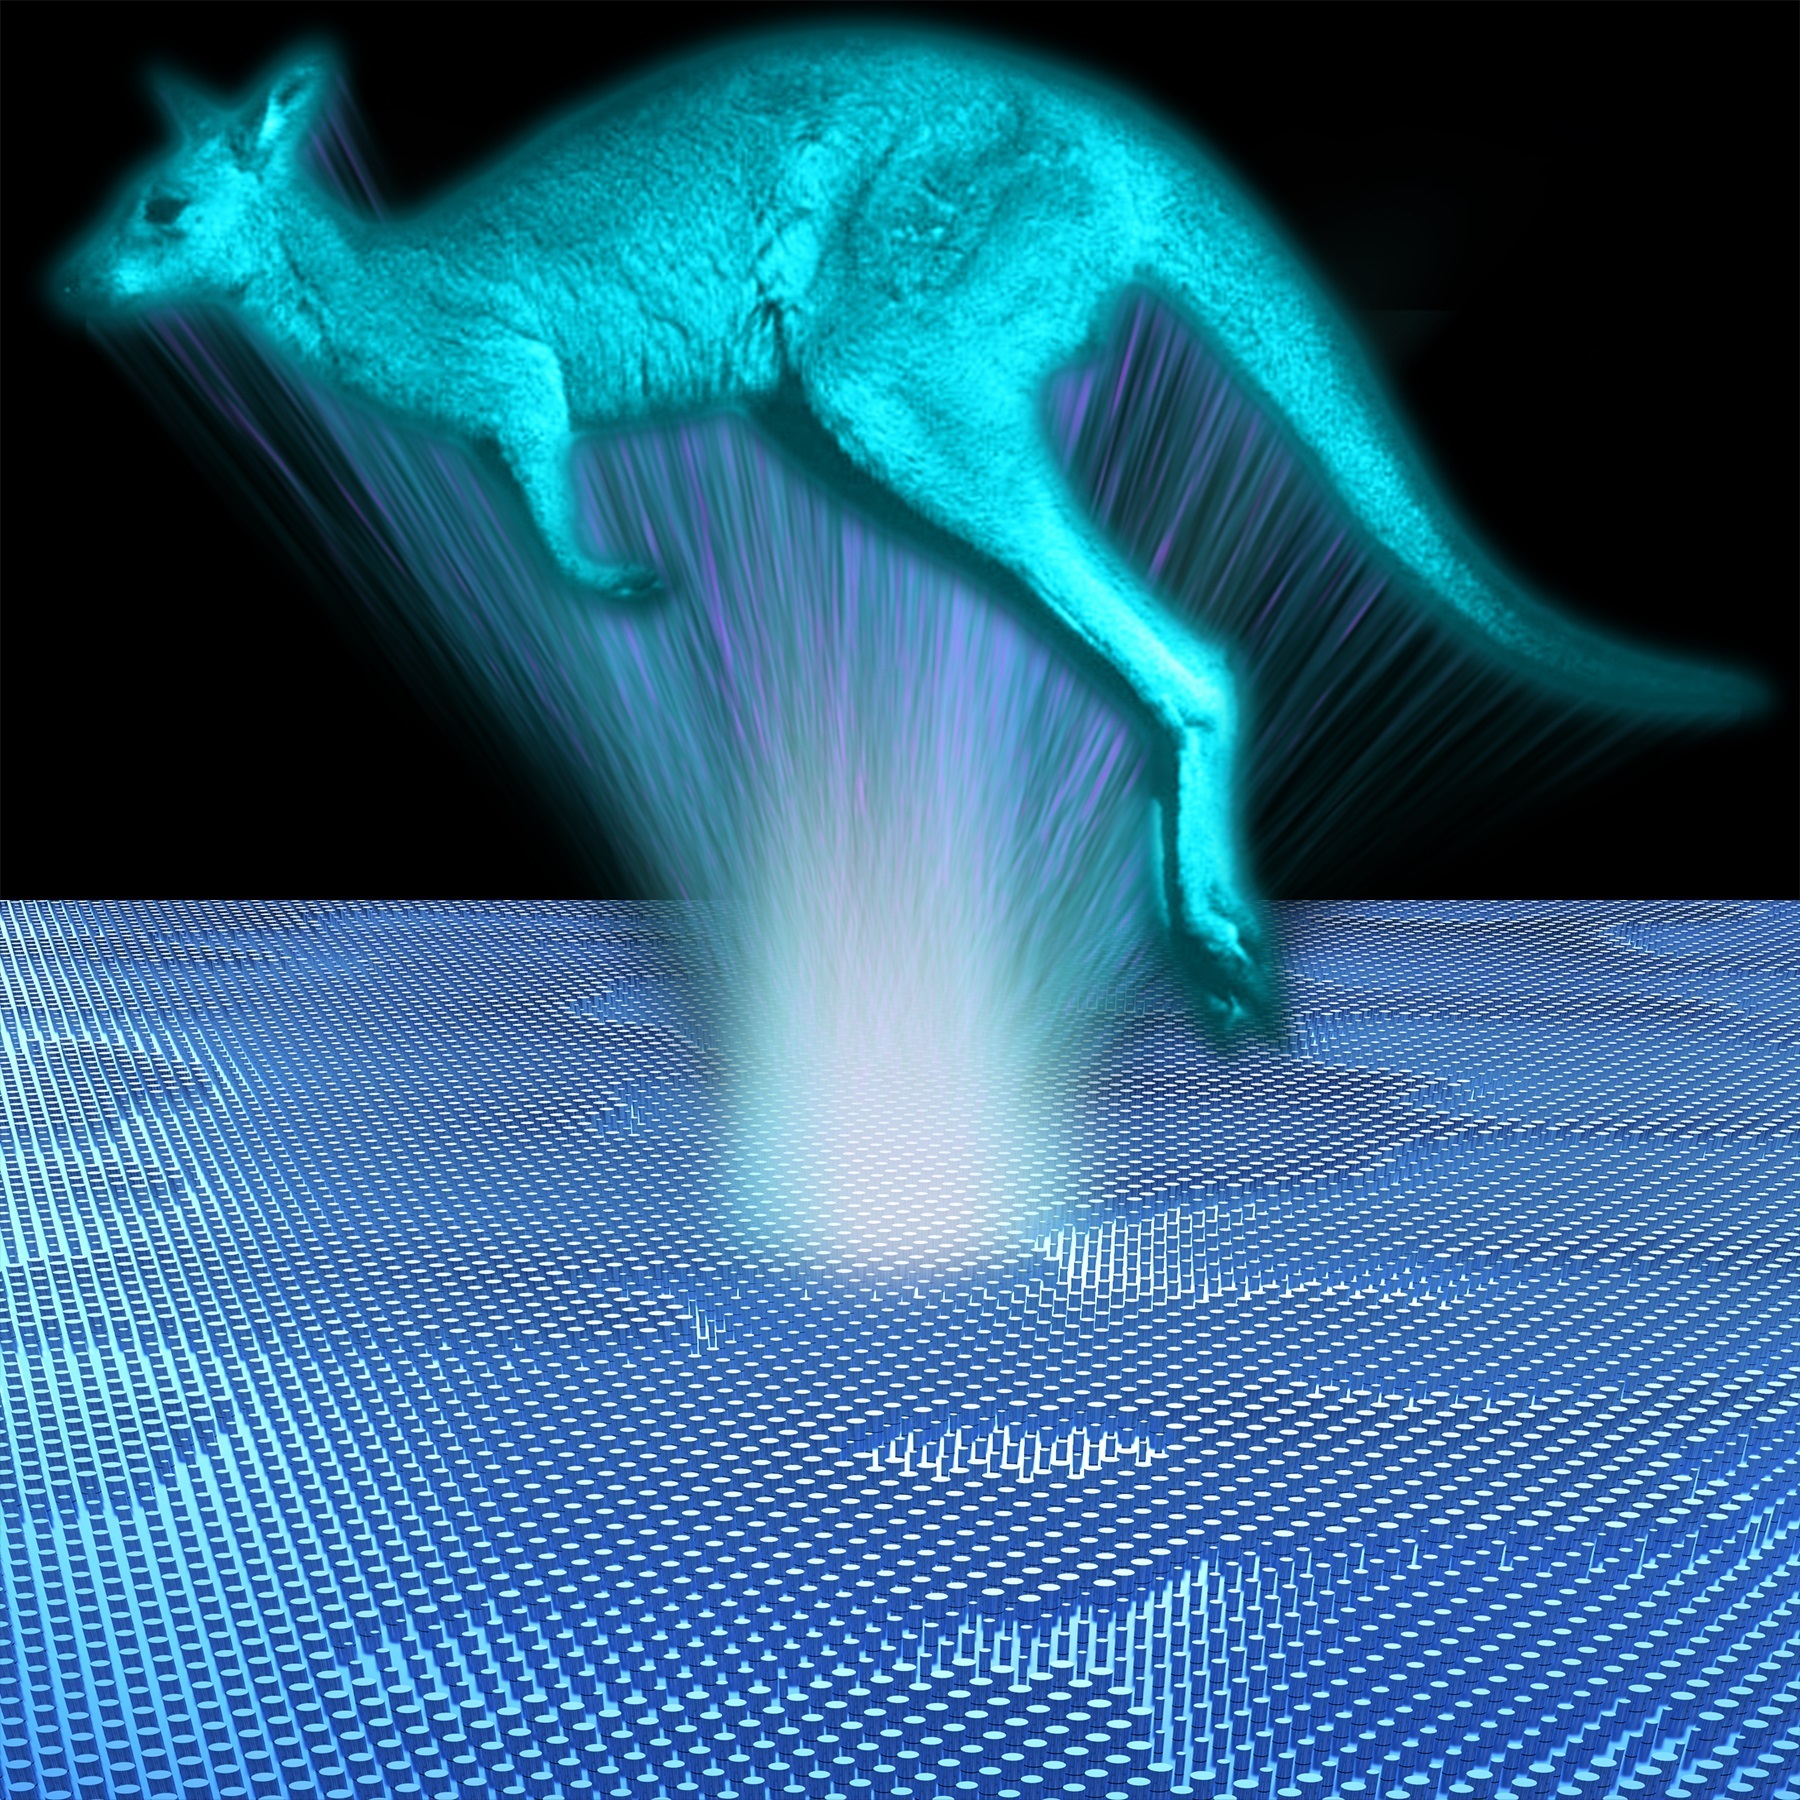 The image of the kangaroo is a concept image of the hologram